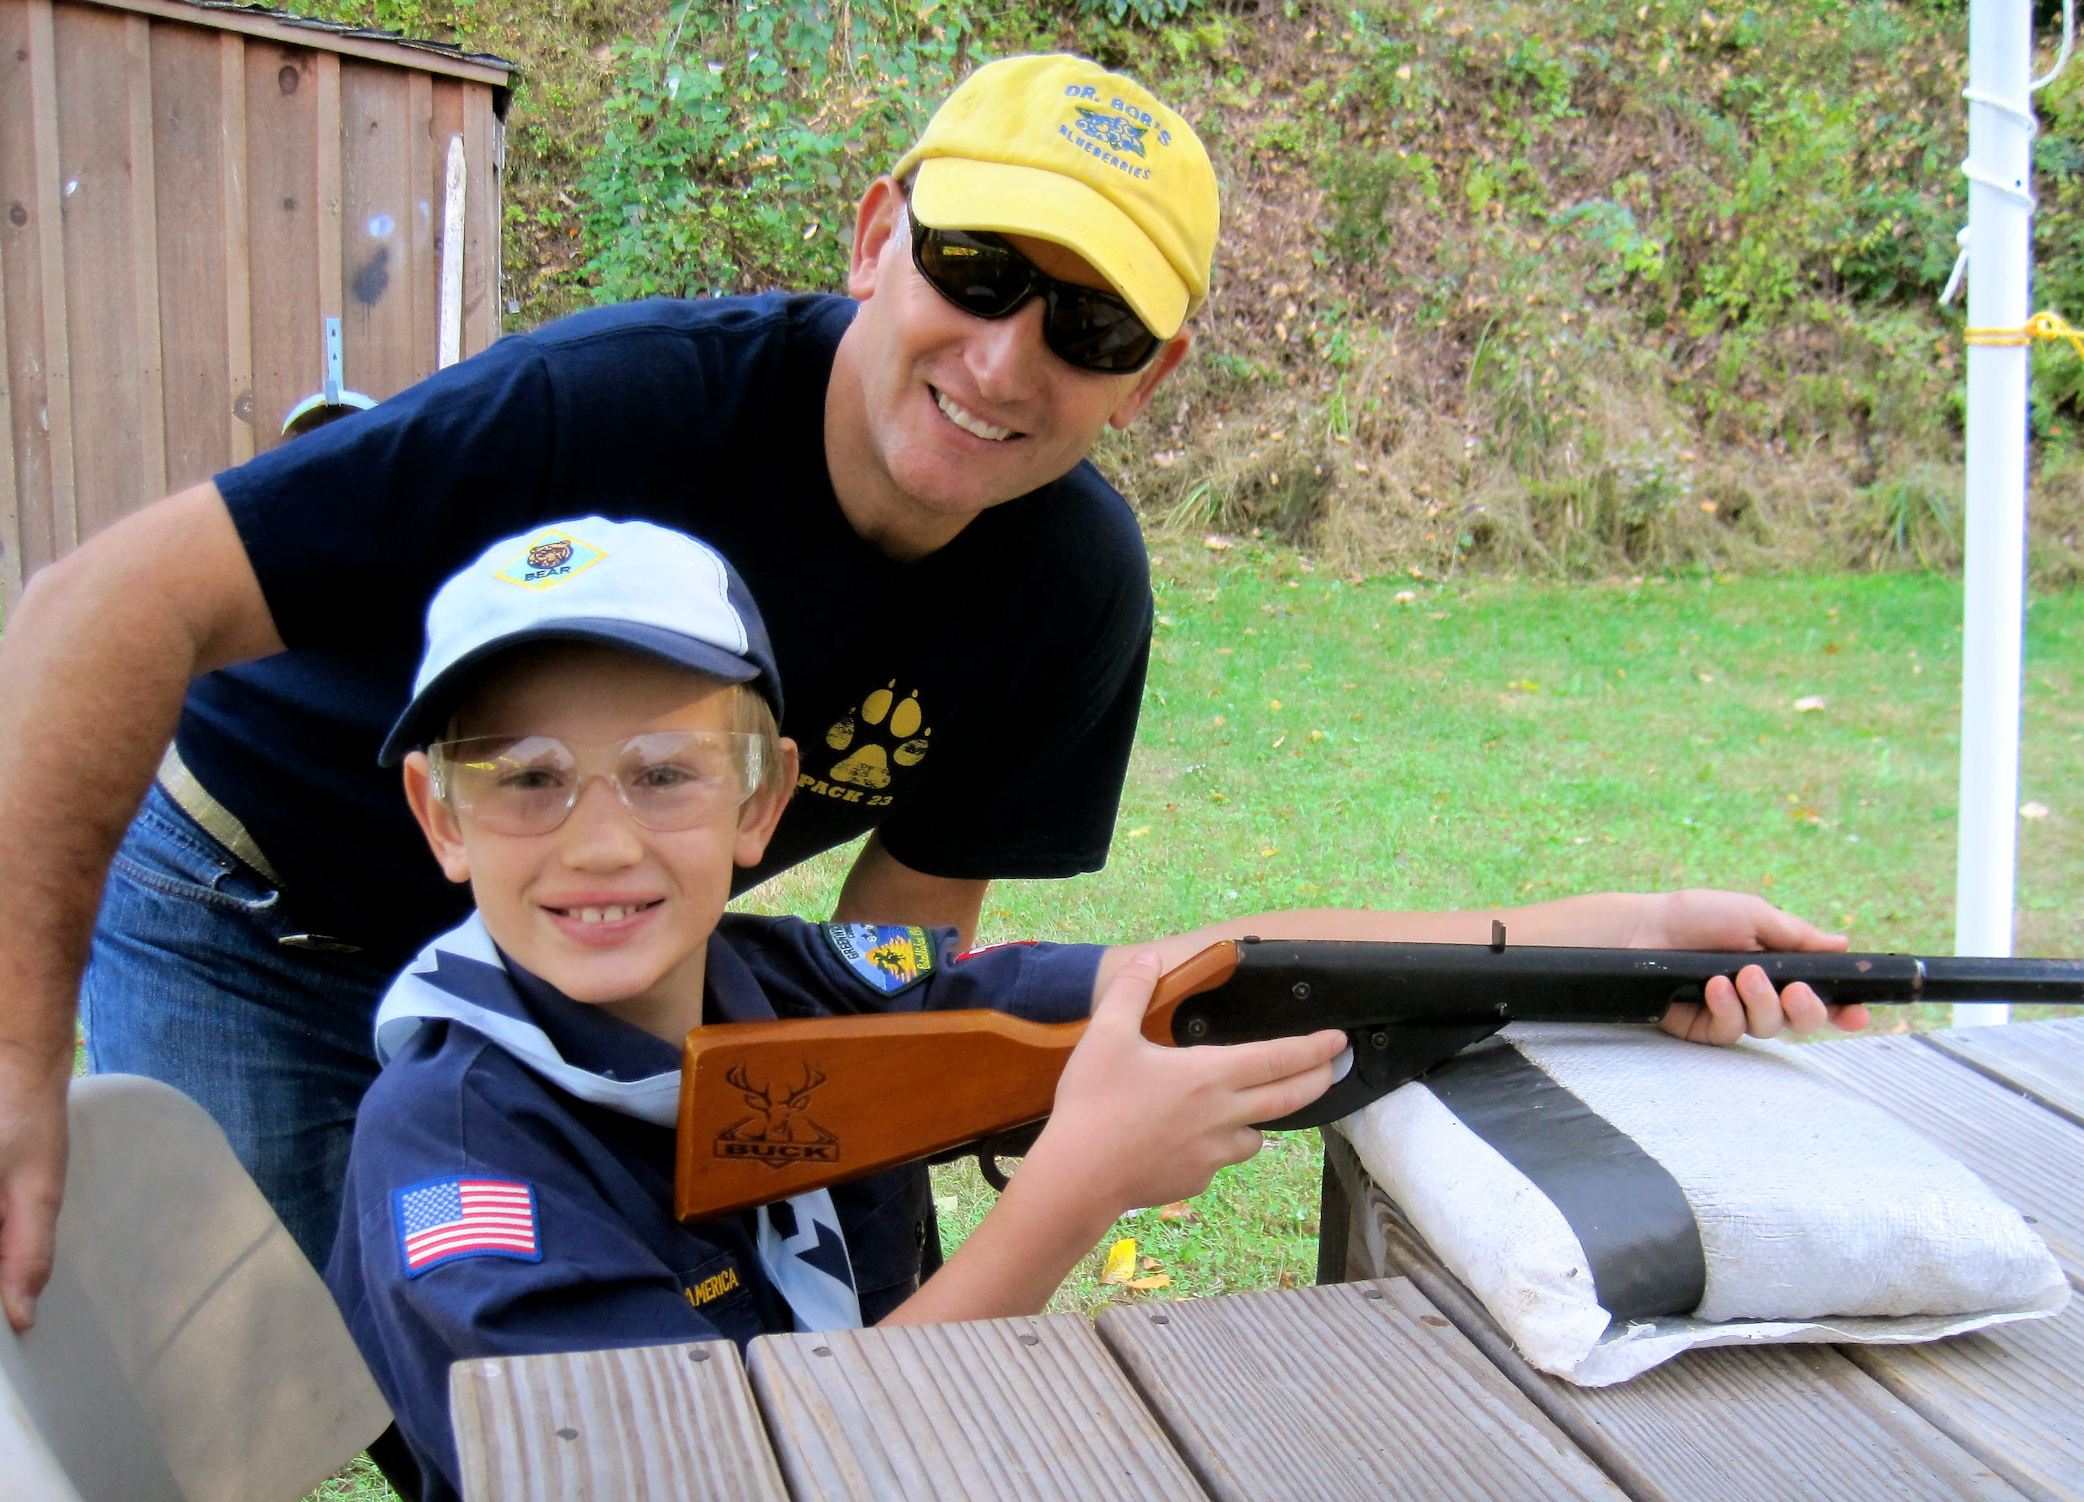 Richard Kosinski with son Jack at the BB range at Greenwich Scouting's Fall Festival at Seton Scout Reservation.